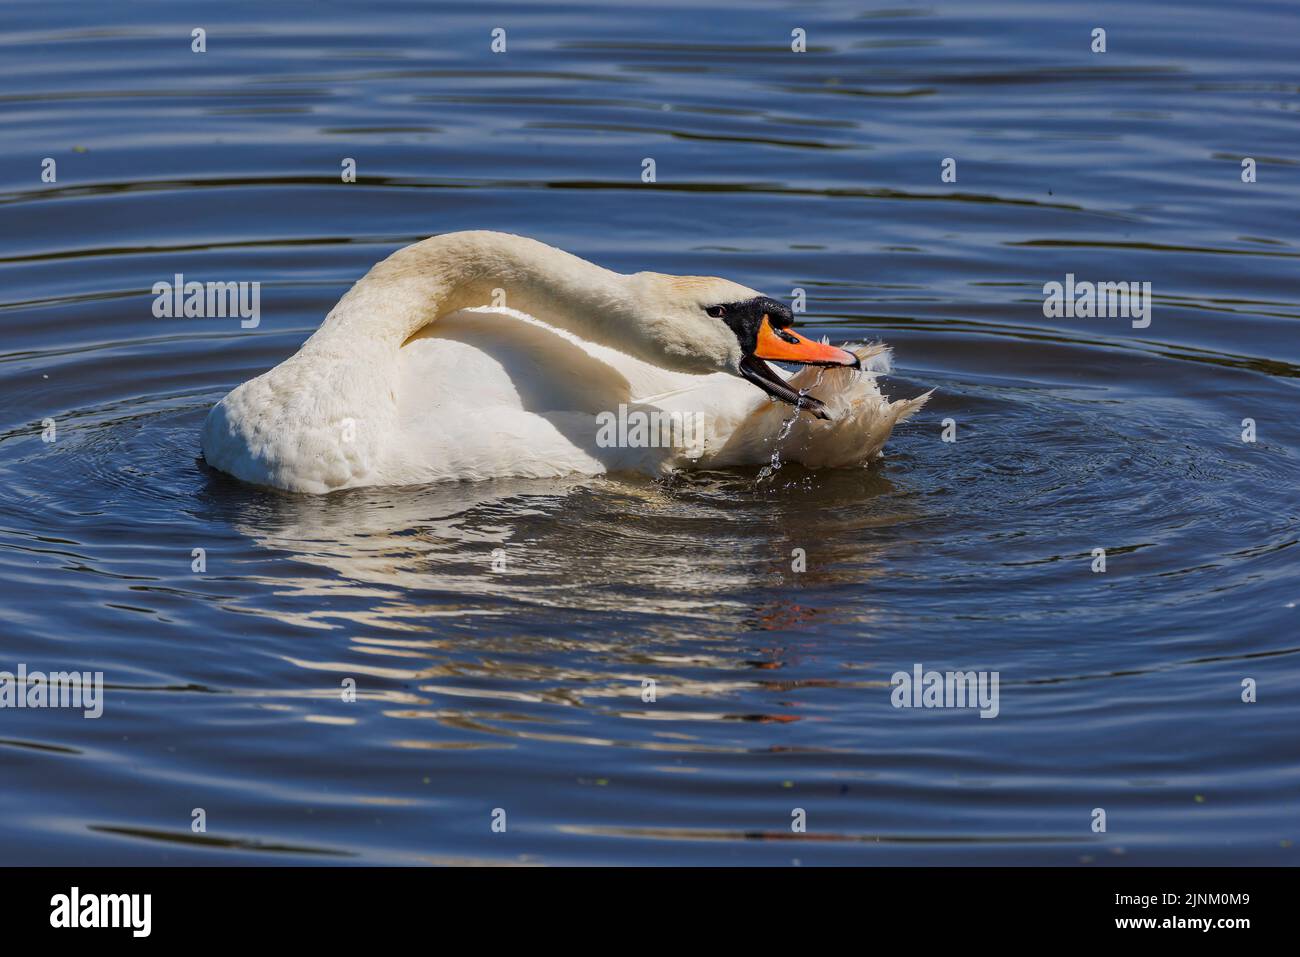 Swan on a hot day Stock Photo